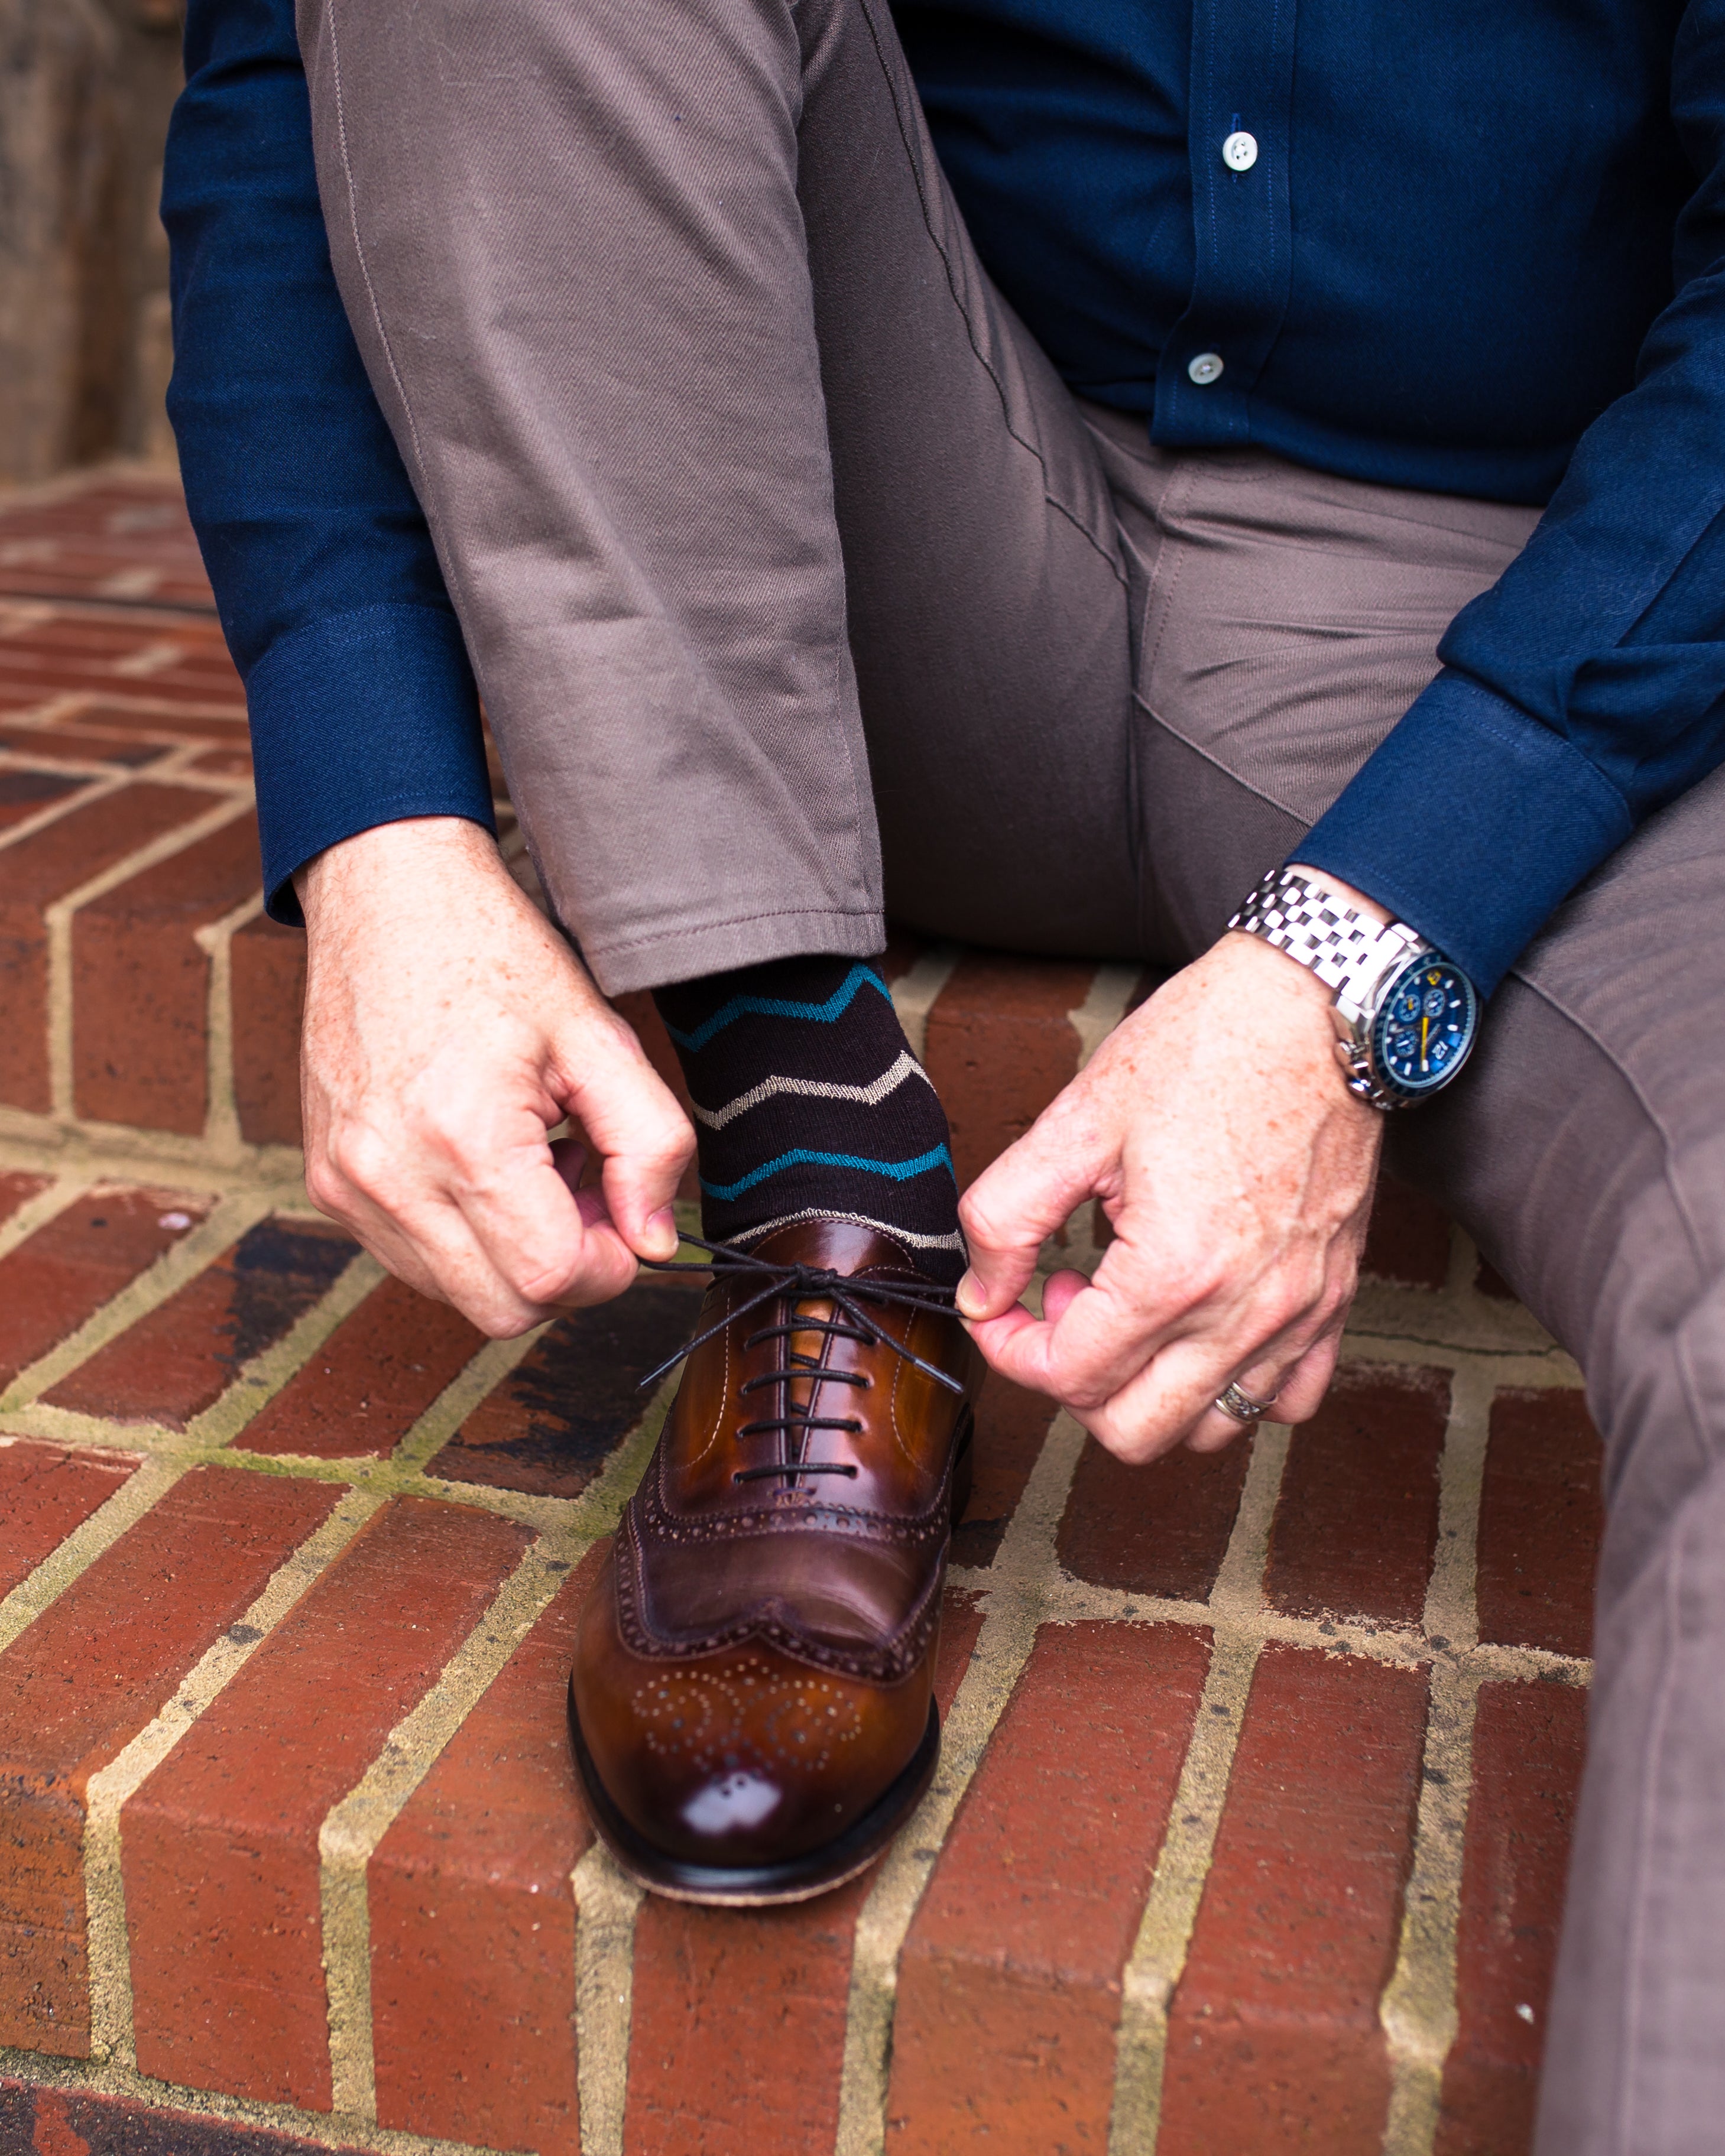 purple over the calf dress socks with blue and yellows zigzag lines, brown shoes, grey pants, and a watch